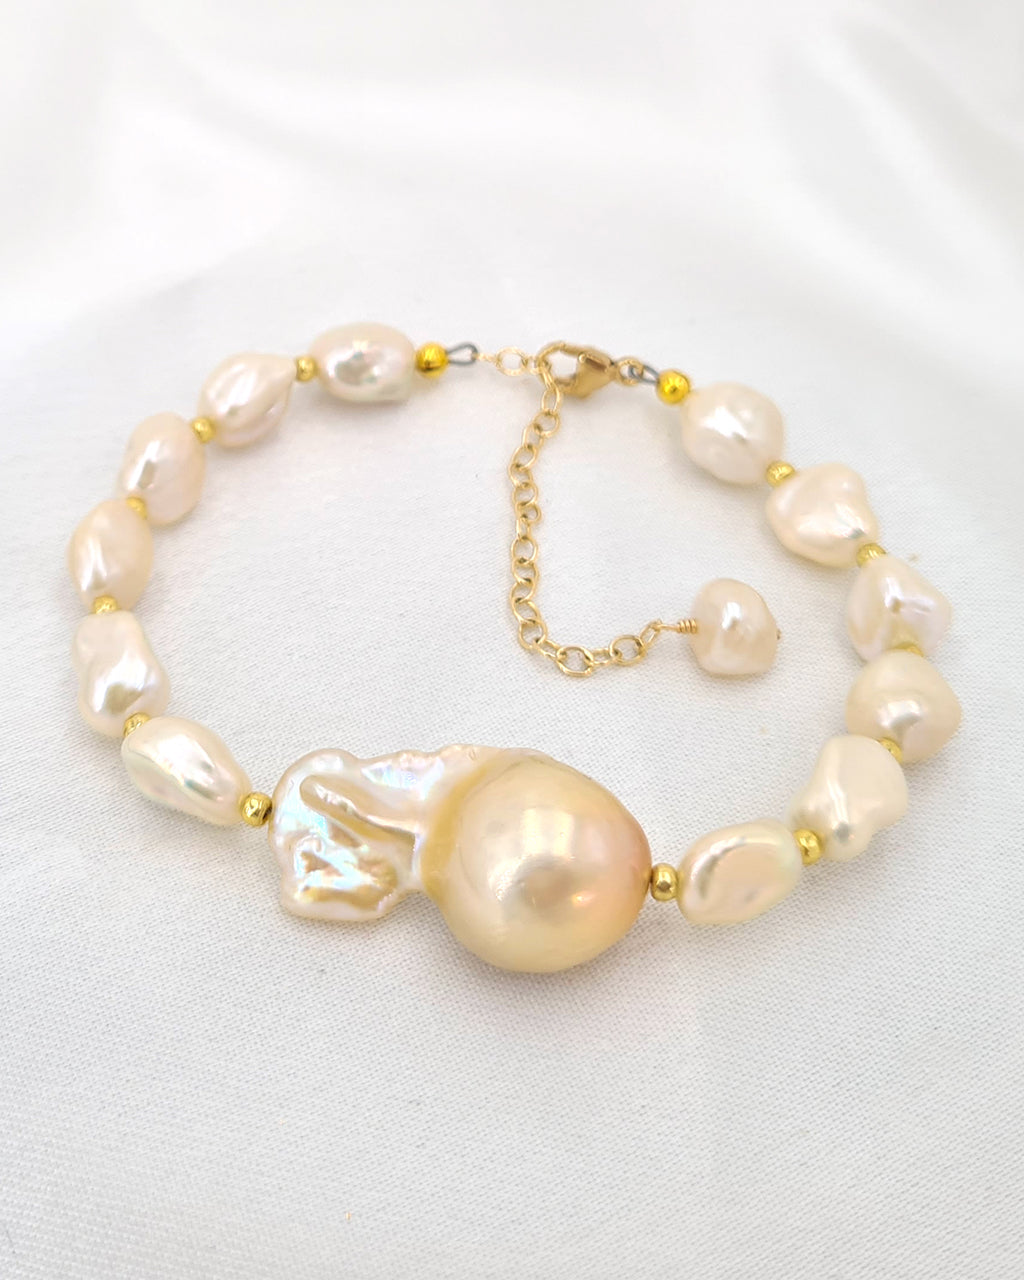 Get Personalised Charm Pearl Bracelet at ₹ 550 | LBB Shop